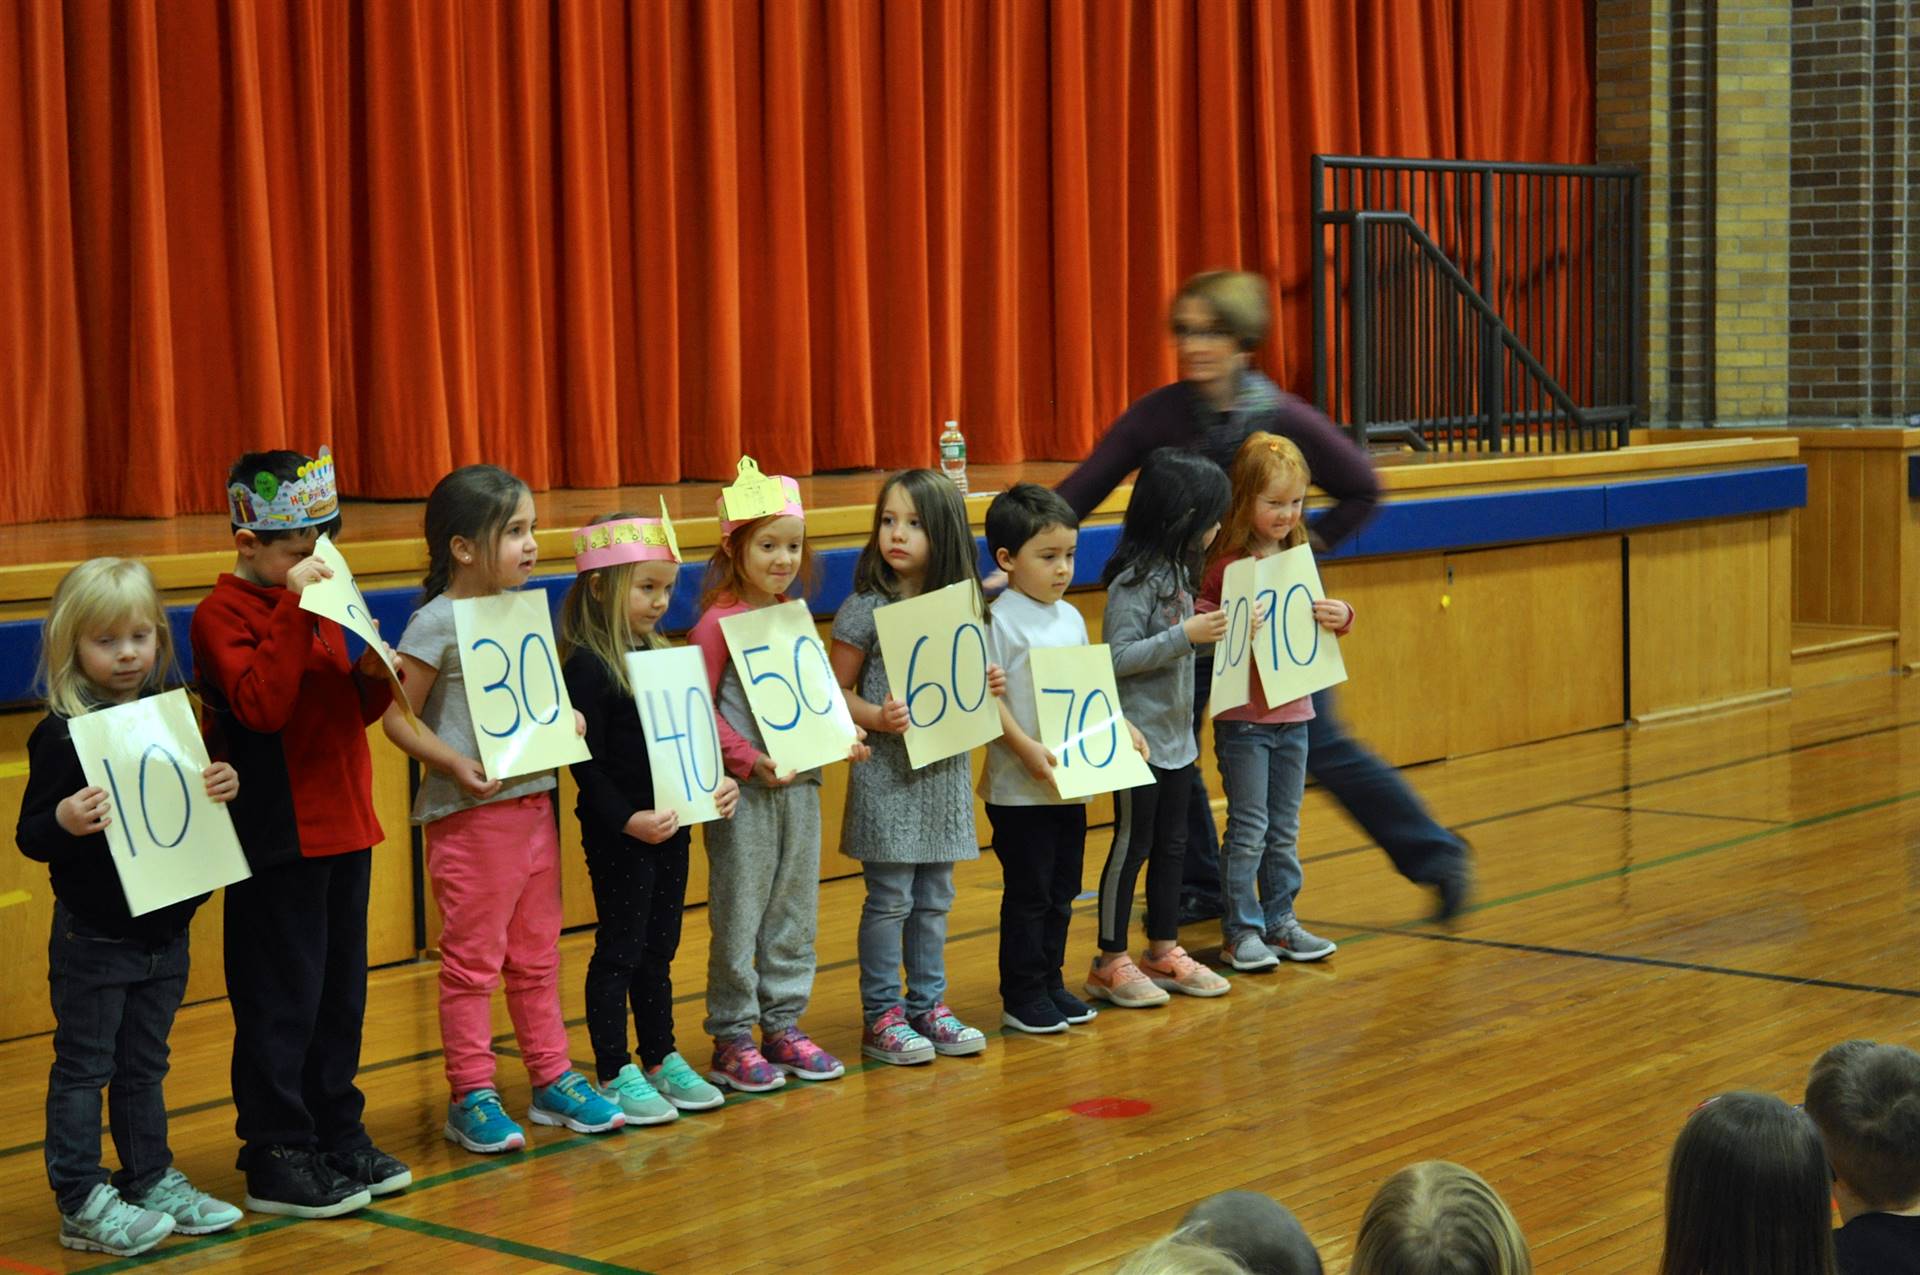 students holding signs counting to 100 by 10's.